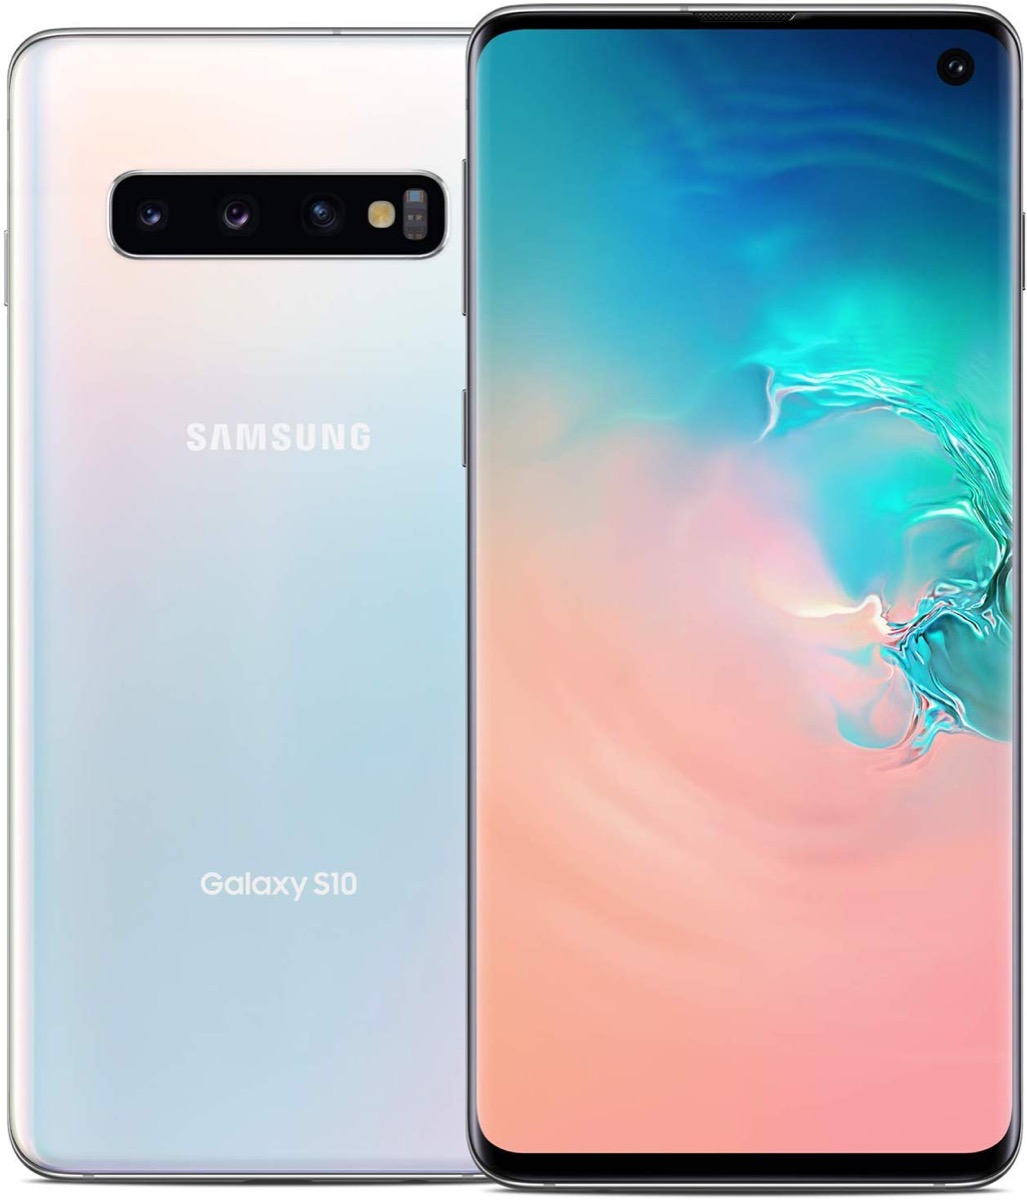 Samsung phone, front and back images